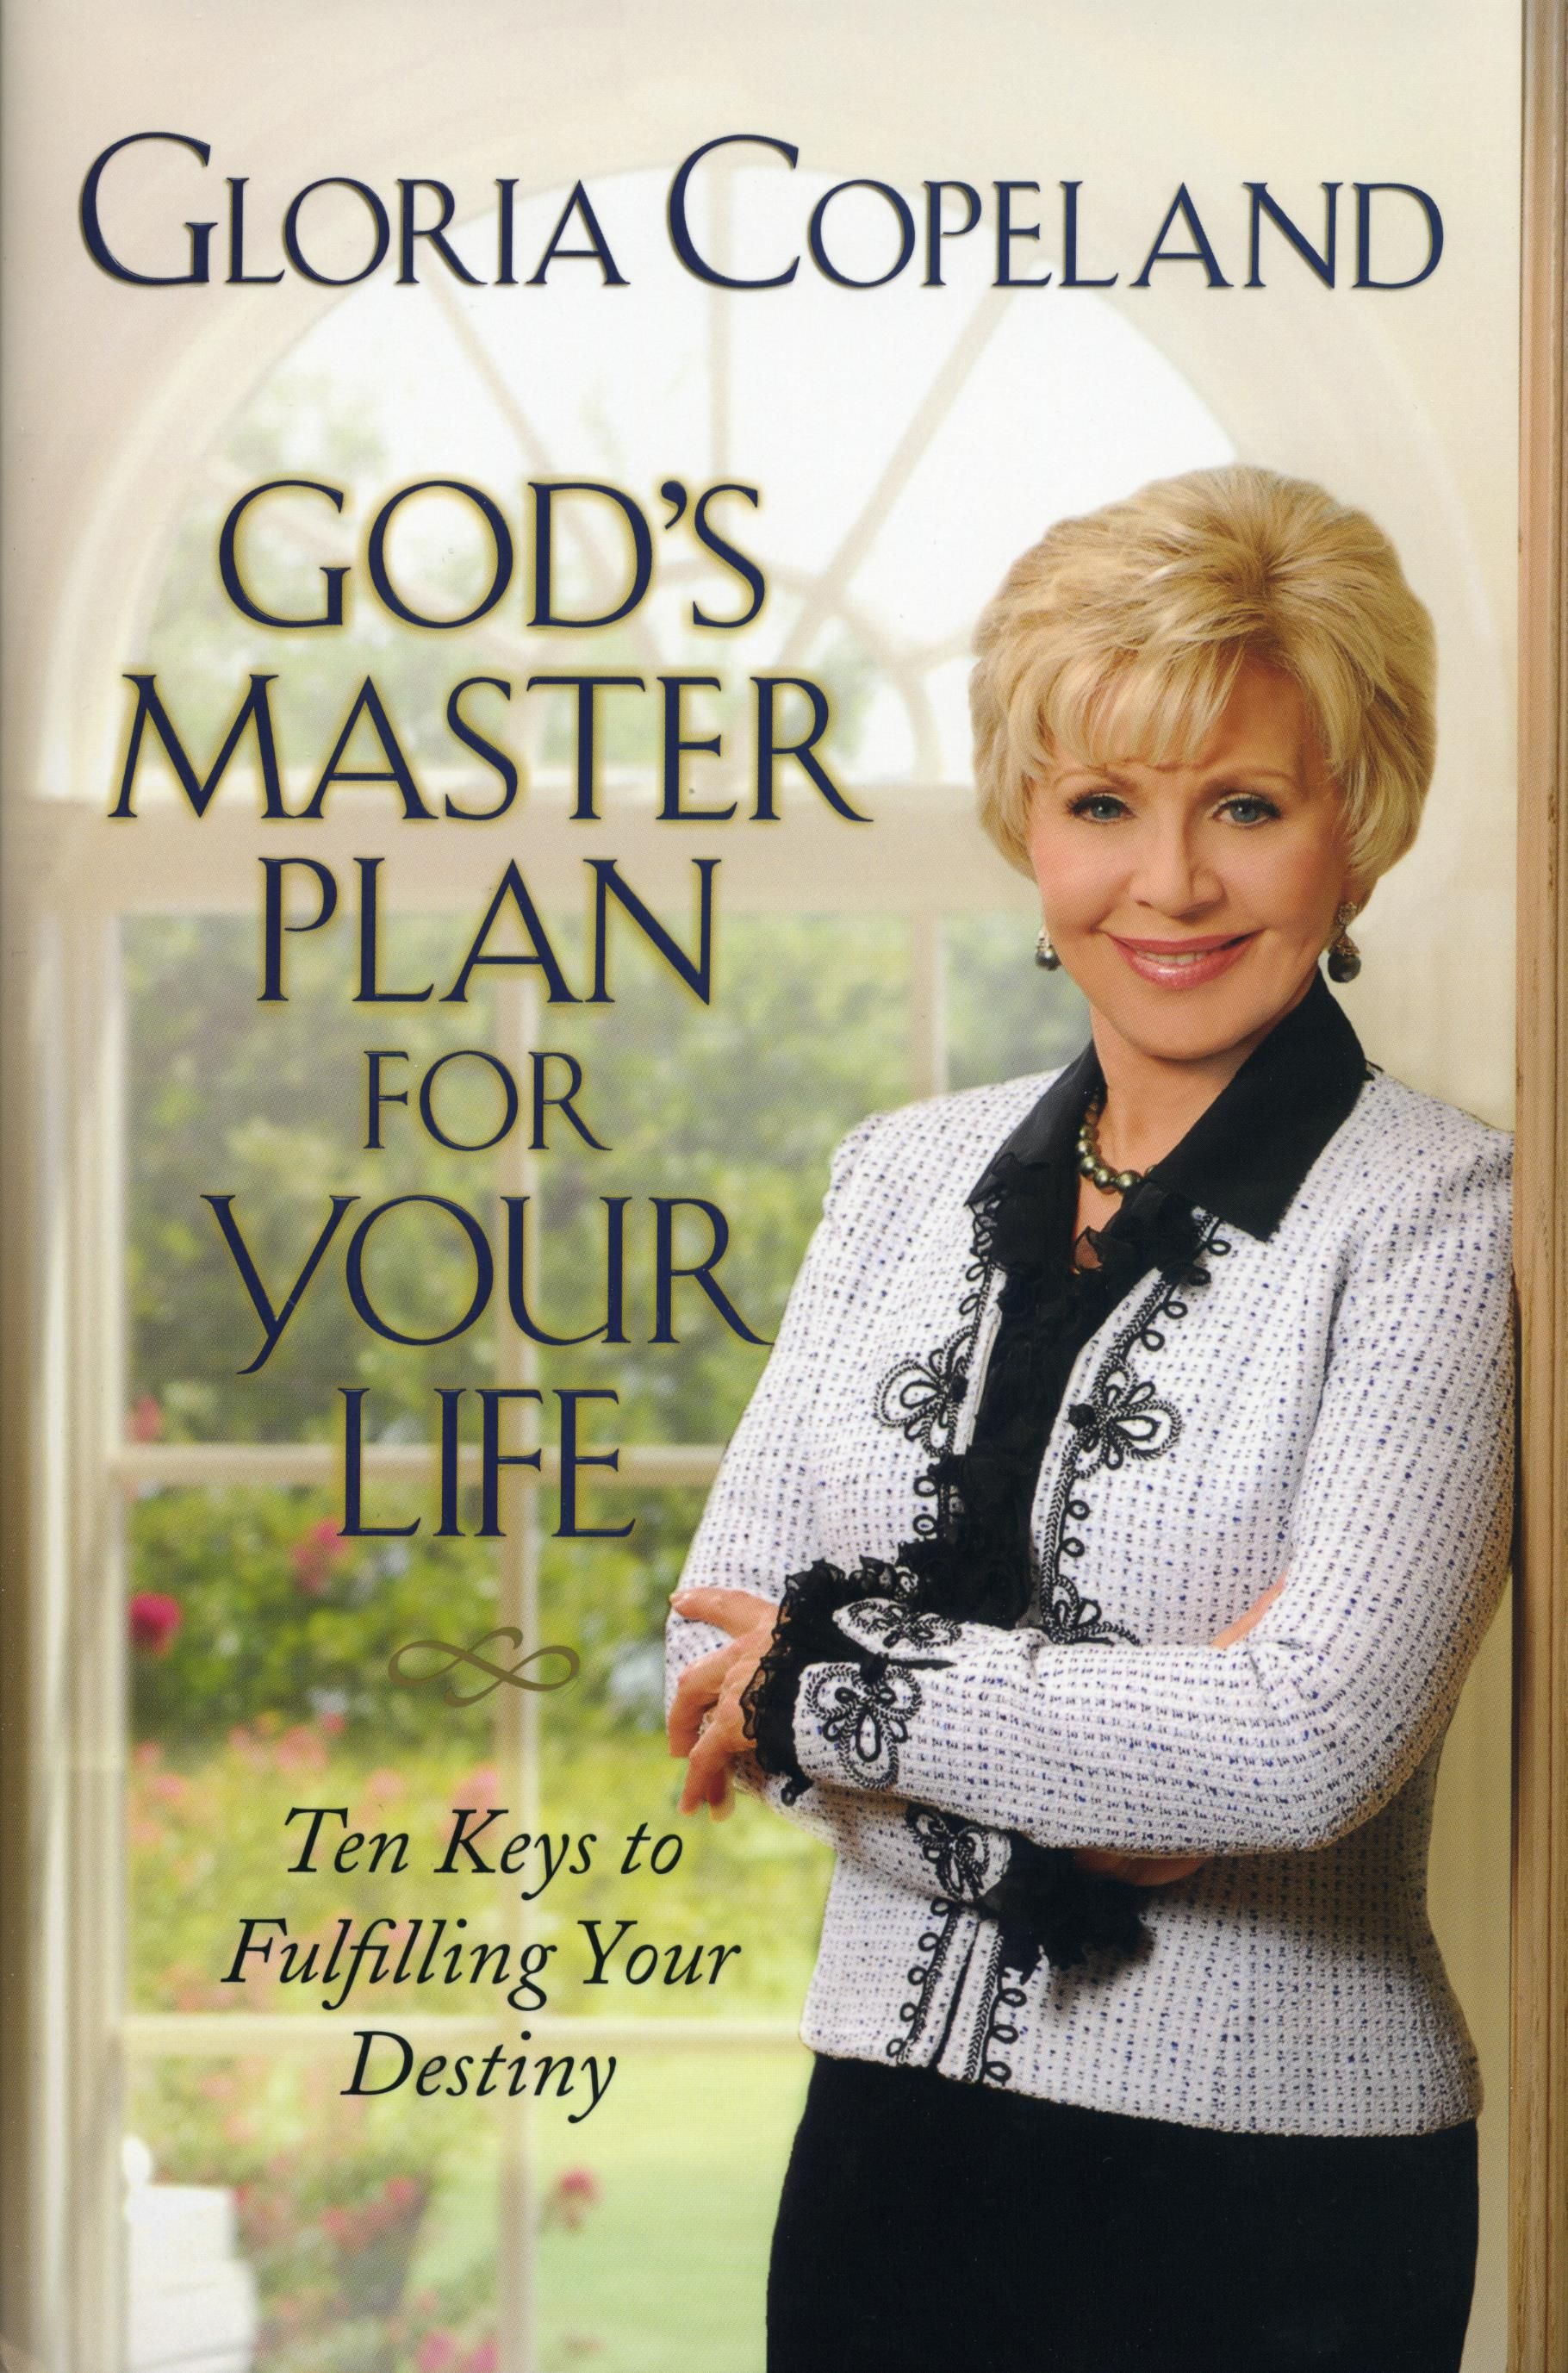 G. Copeland: God's Master Plan for your life